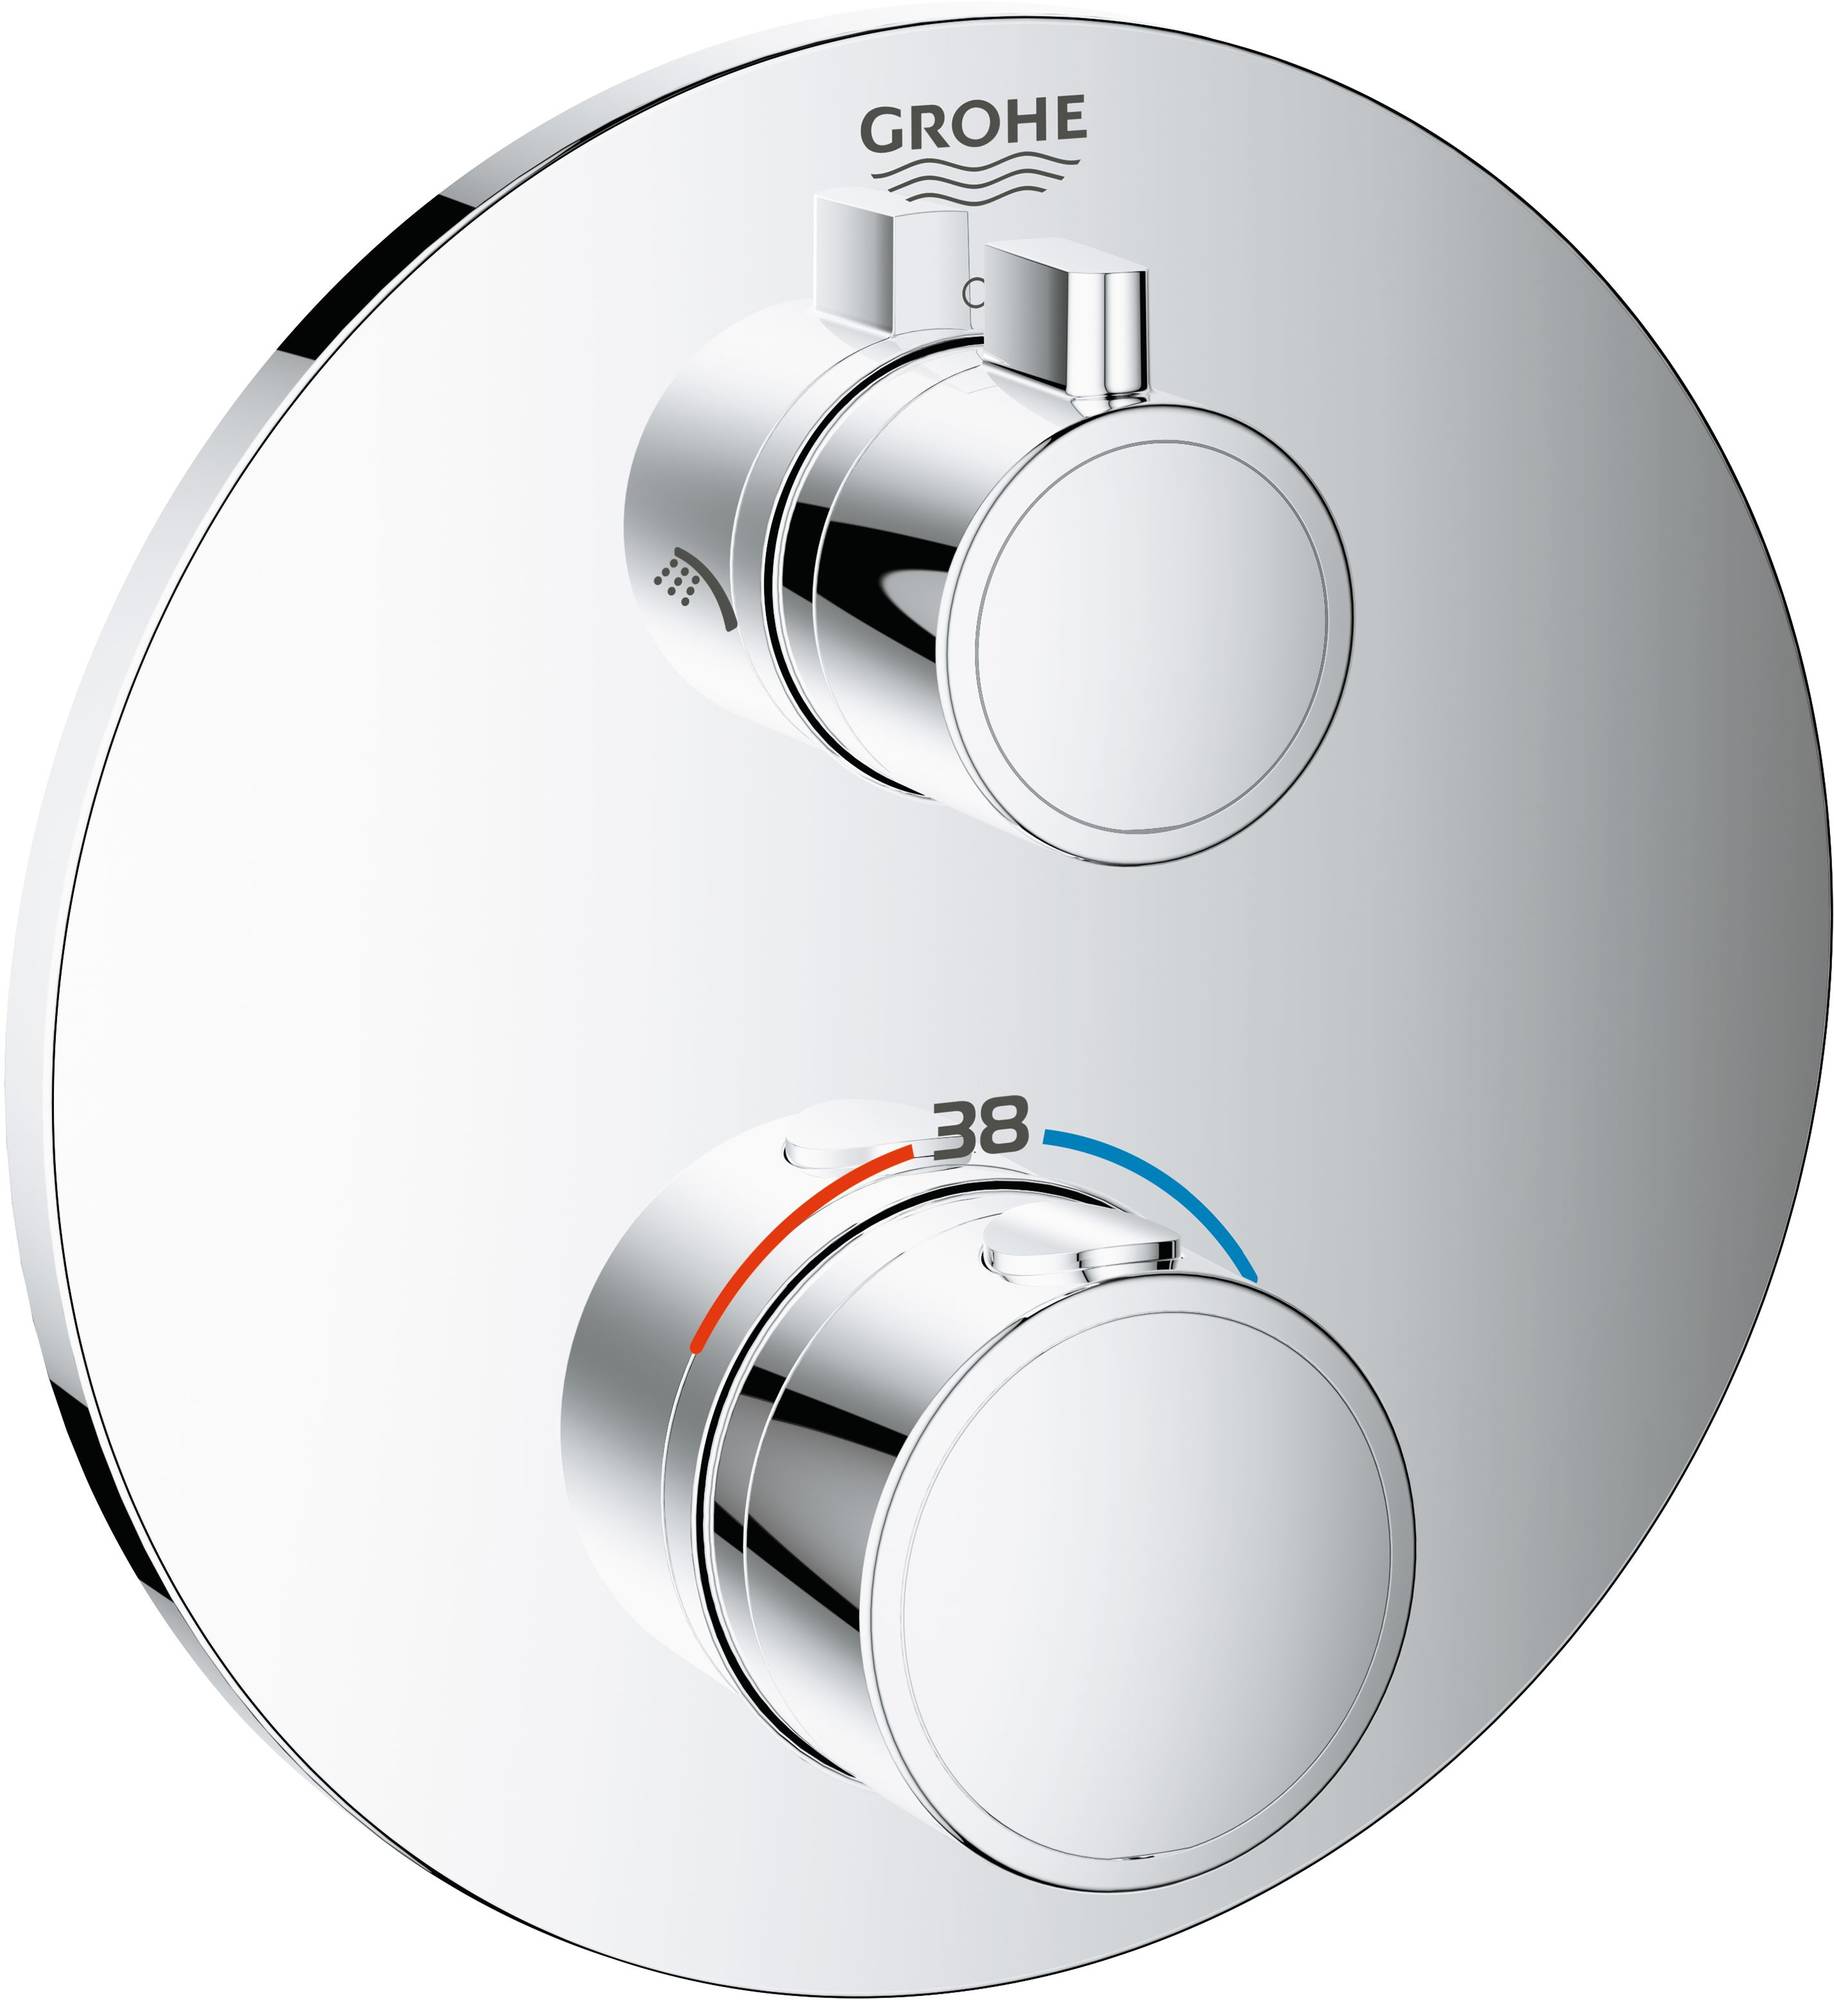 Grohe Grohtherm Afbouwdeel Thermostaat Chroom